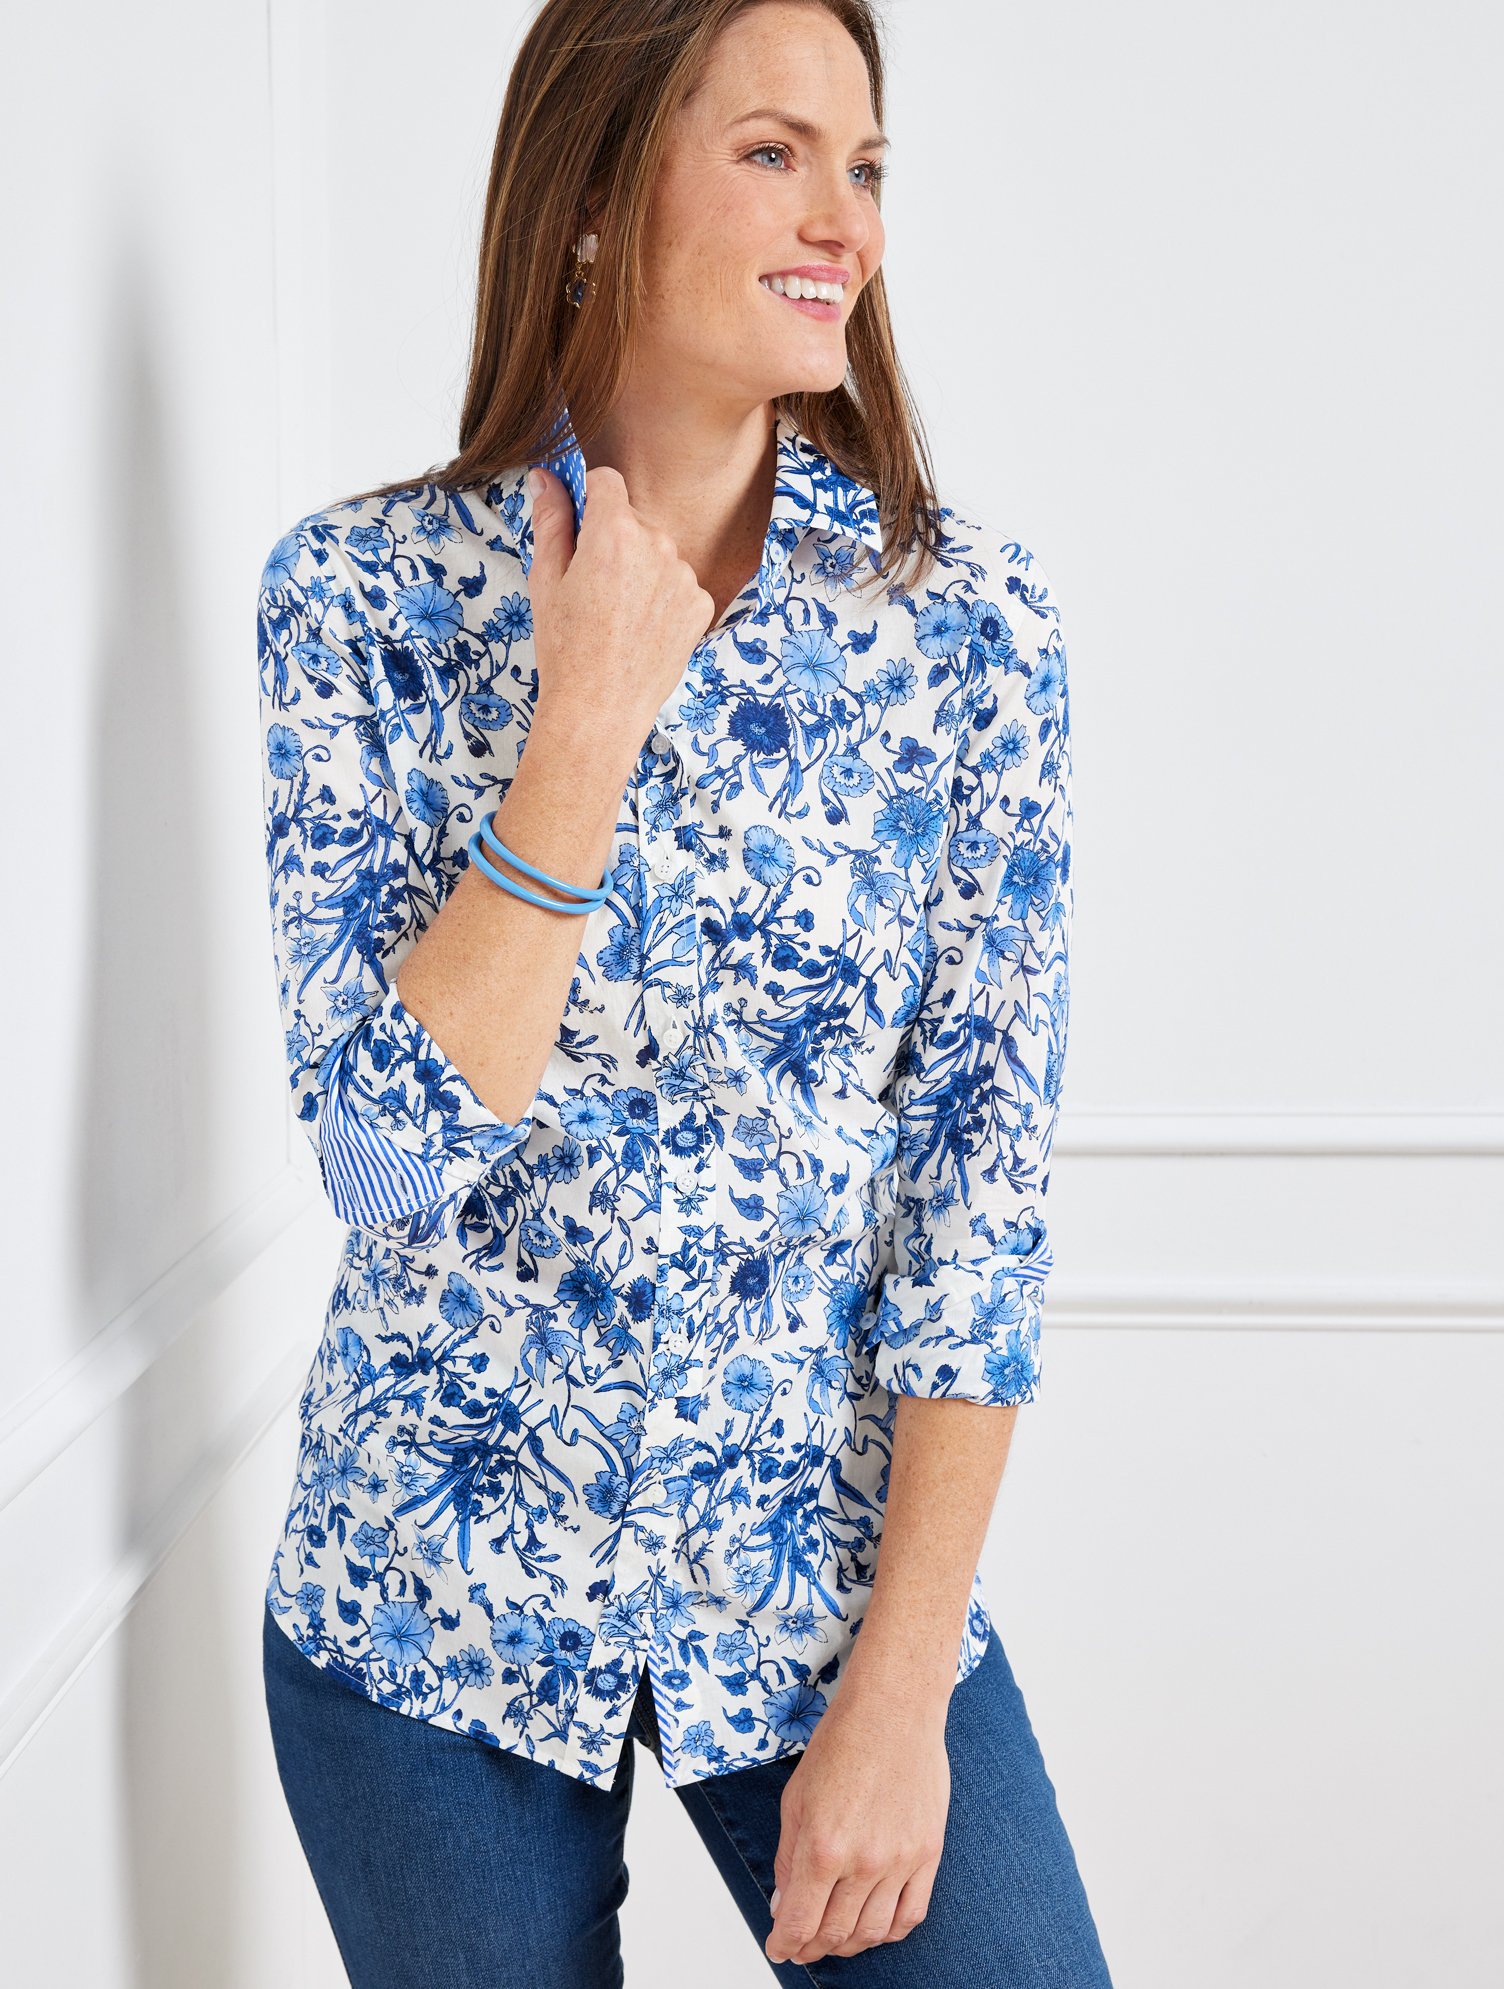 Talbots Cotton Button Front Shirt - Whimsical Garden - Ivory/blue